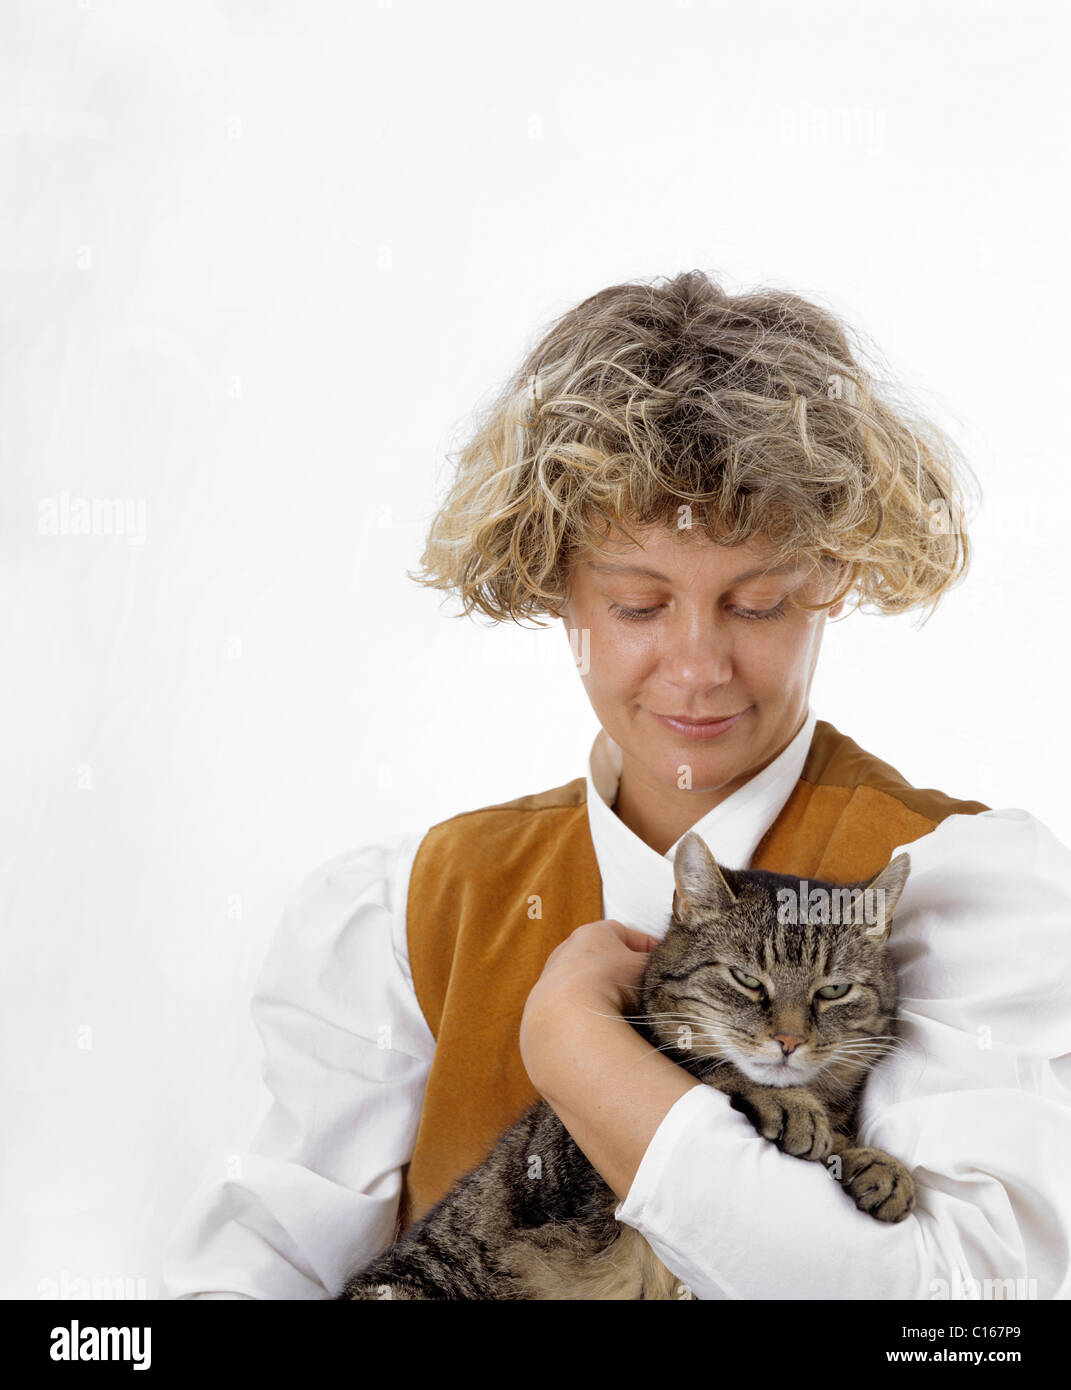 A blond woman is holding a tabby cat in her arms, the cat is purring with pleasure Stock Photo